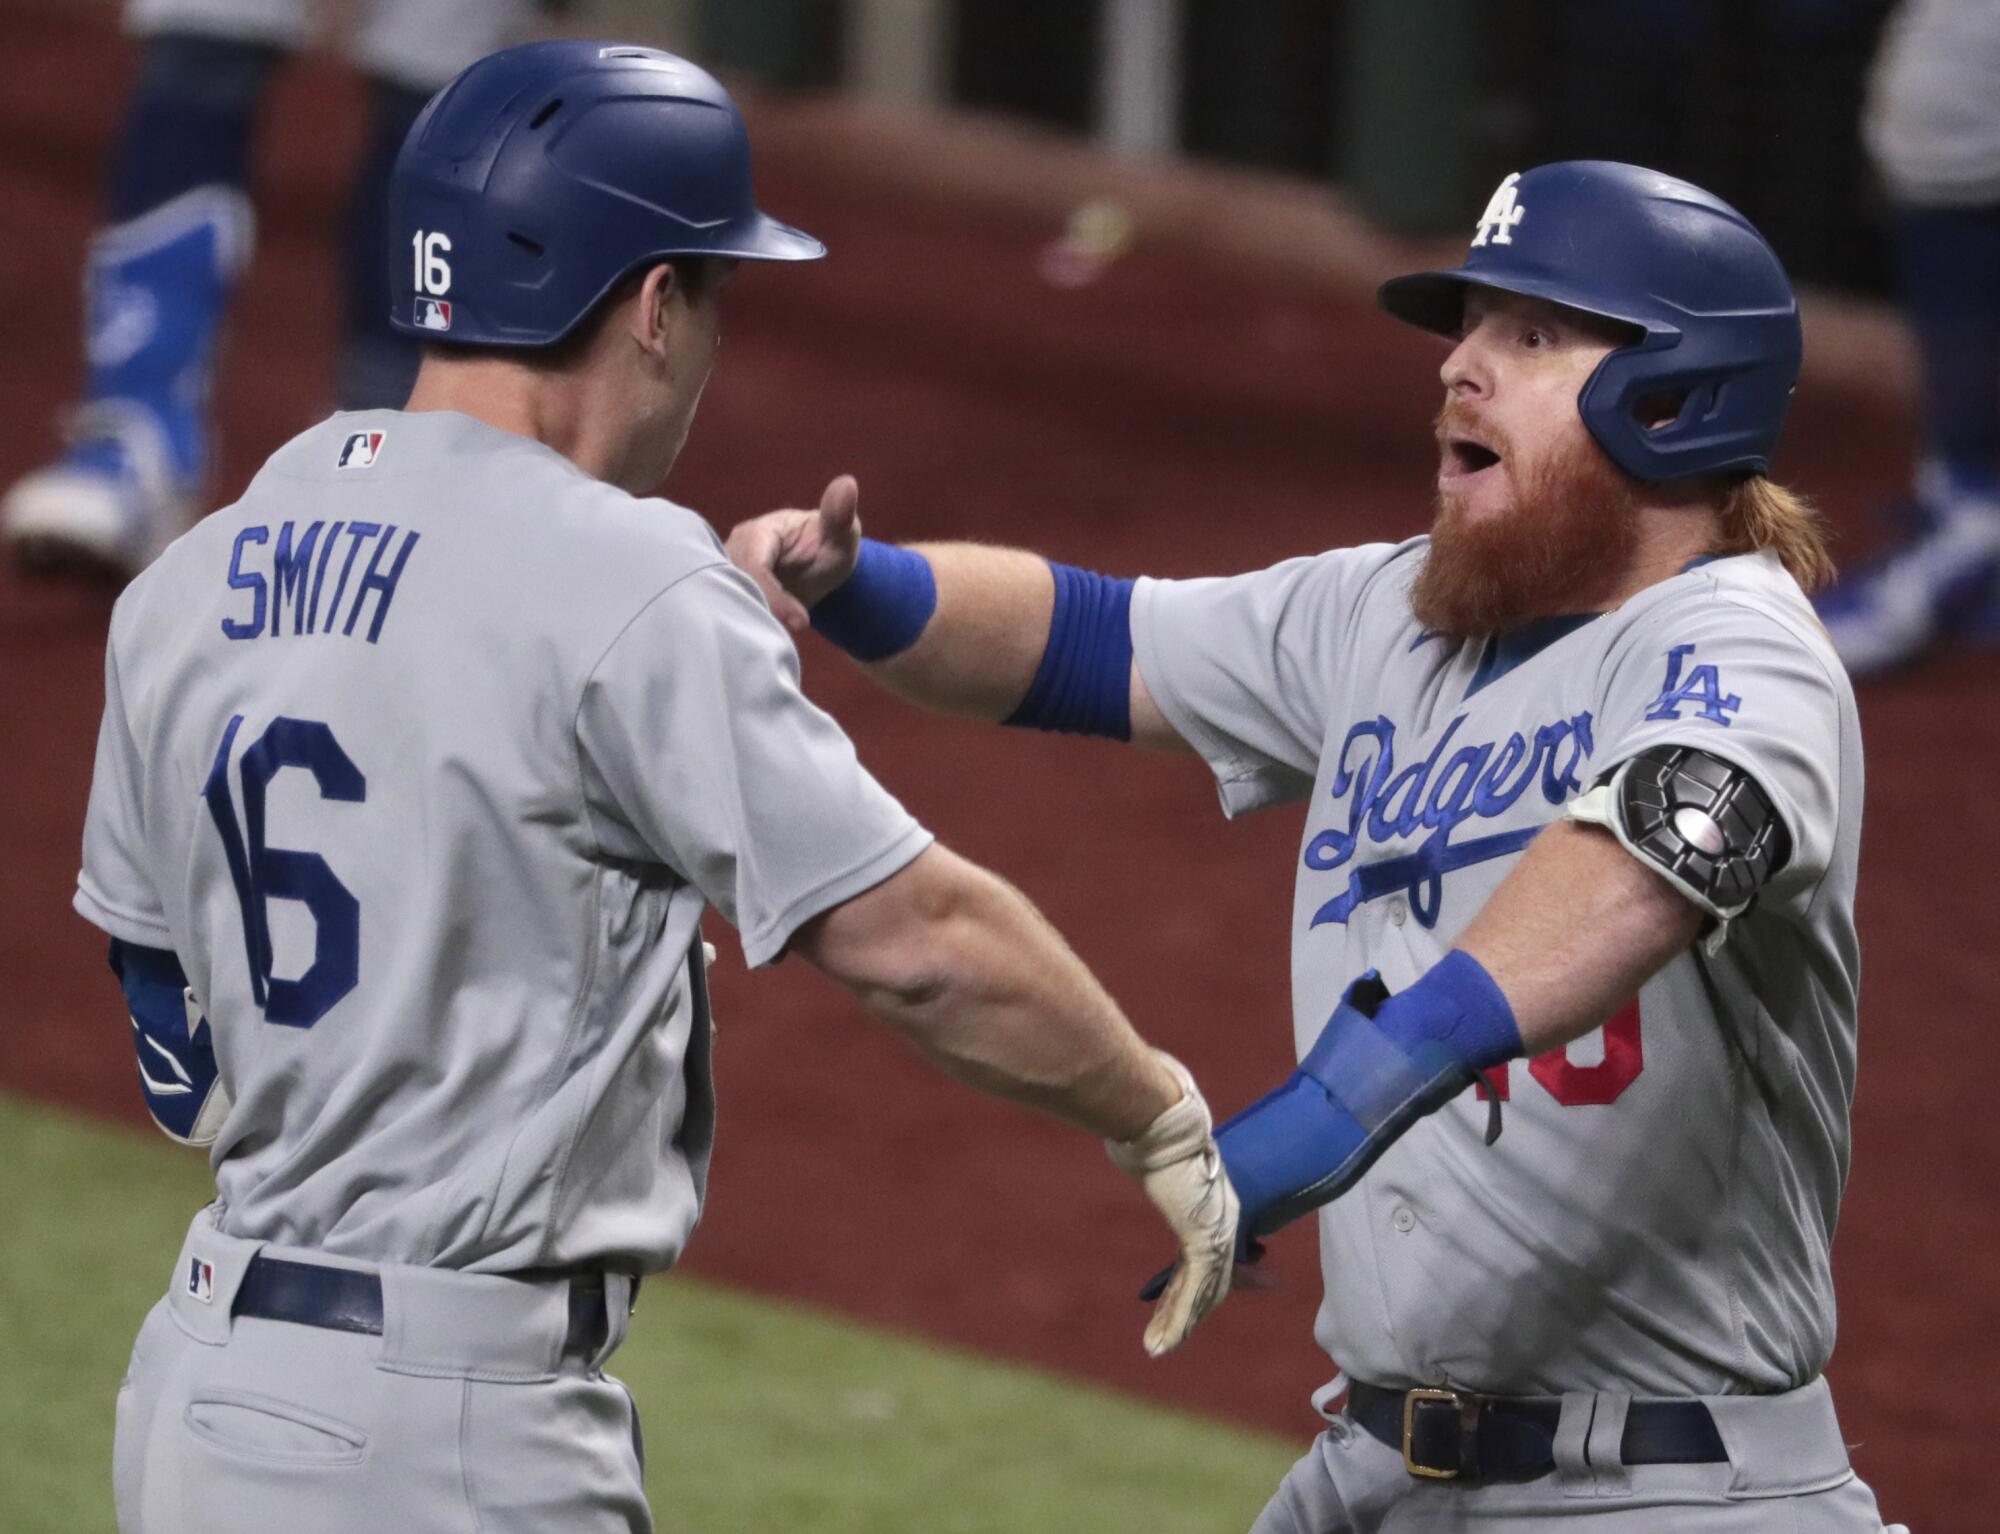 Will Smith, left, celebrates with Dodgers teammate Justin Turner after hitting a three-run home run.